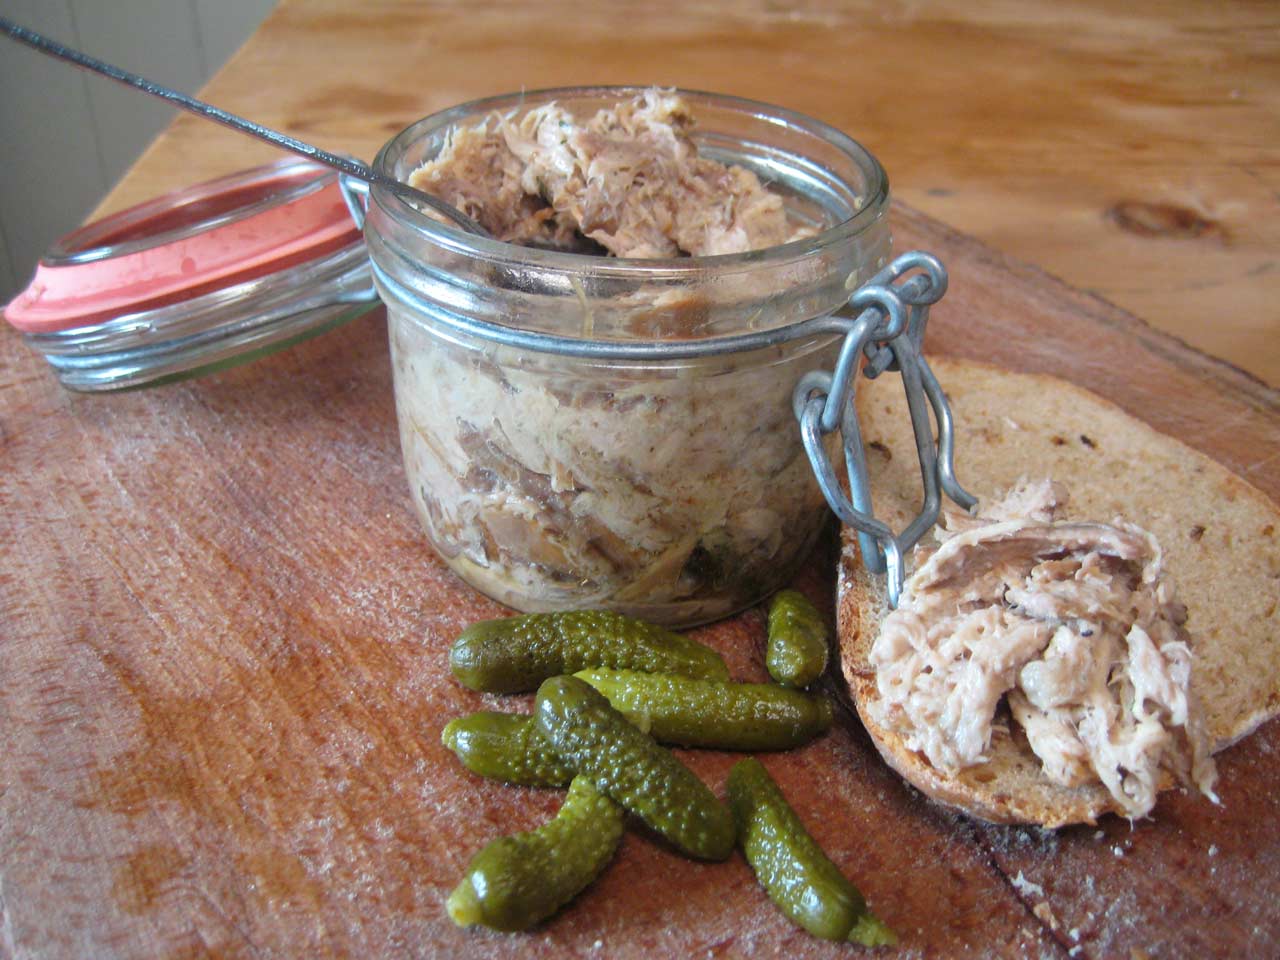 Hugh Fearnley-Whittingstall's rabbit and pork belly rillettes